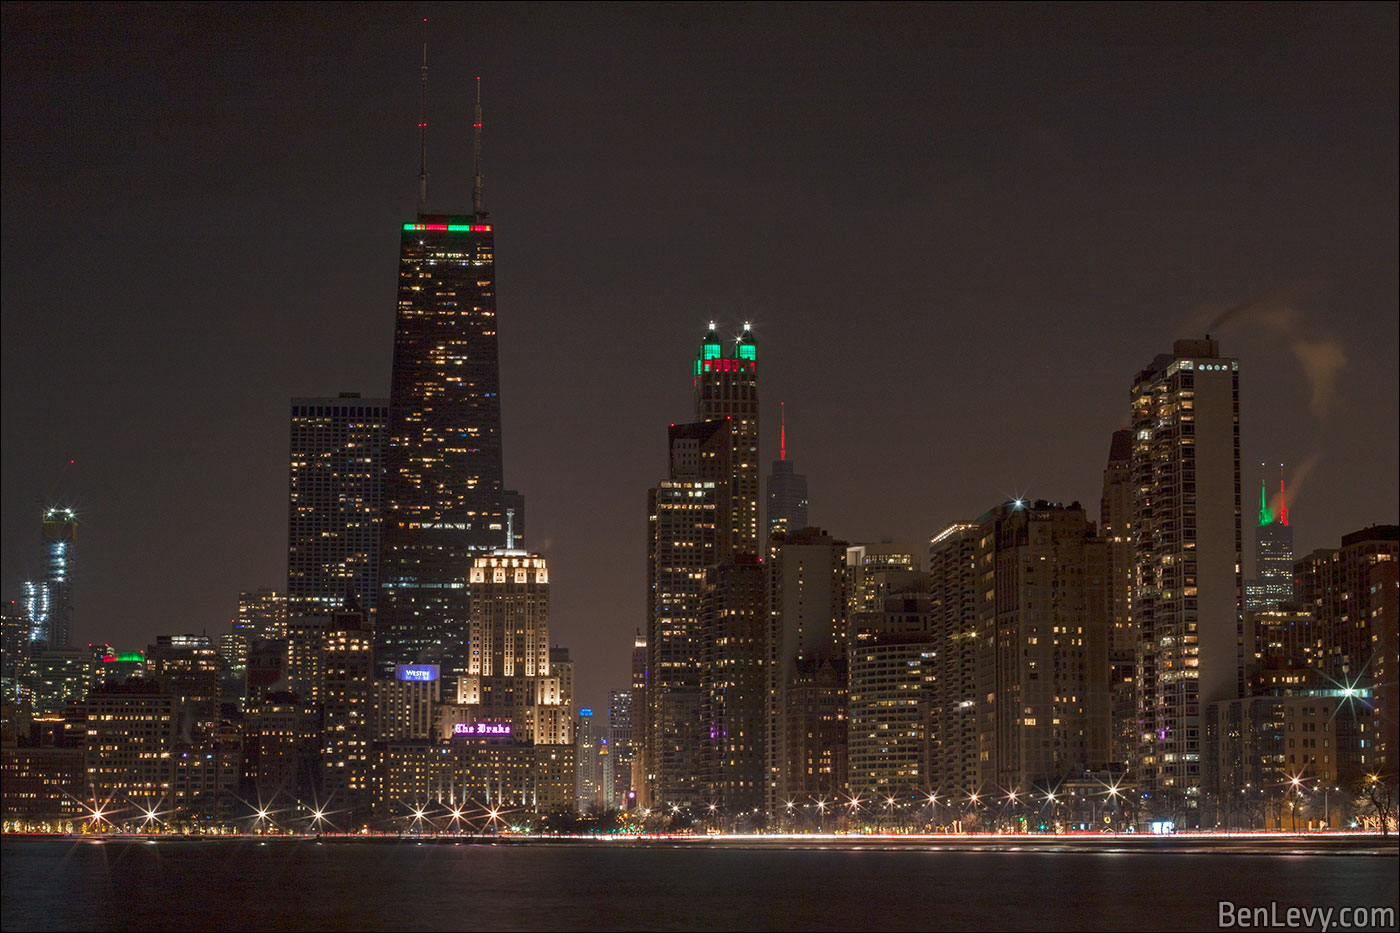 Chicago's skyline from the north